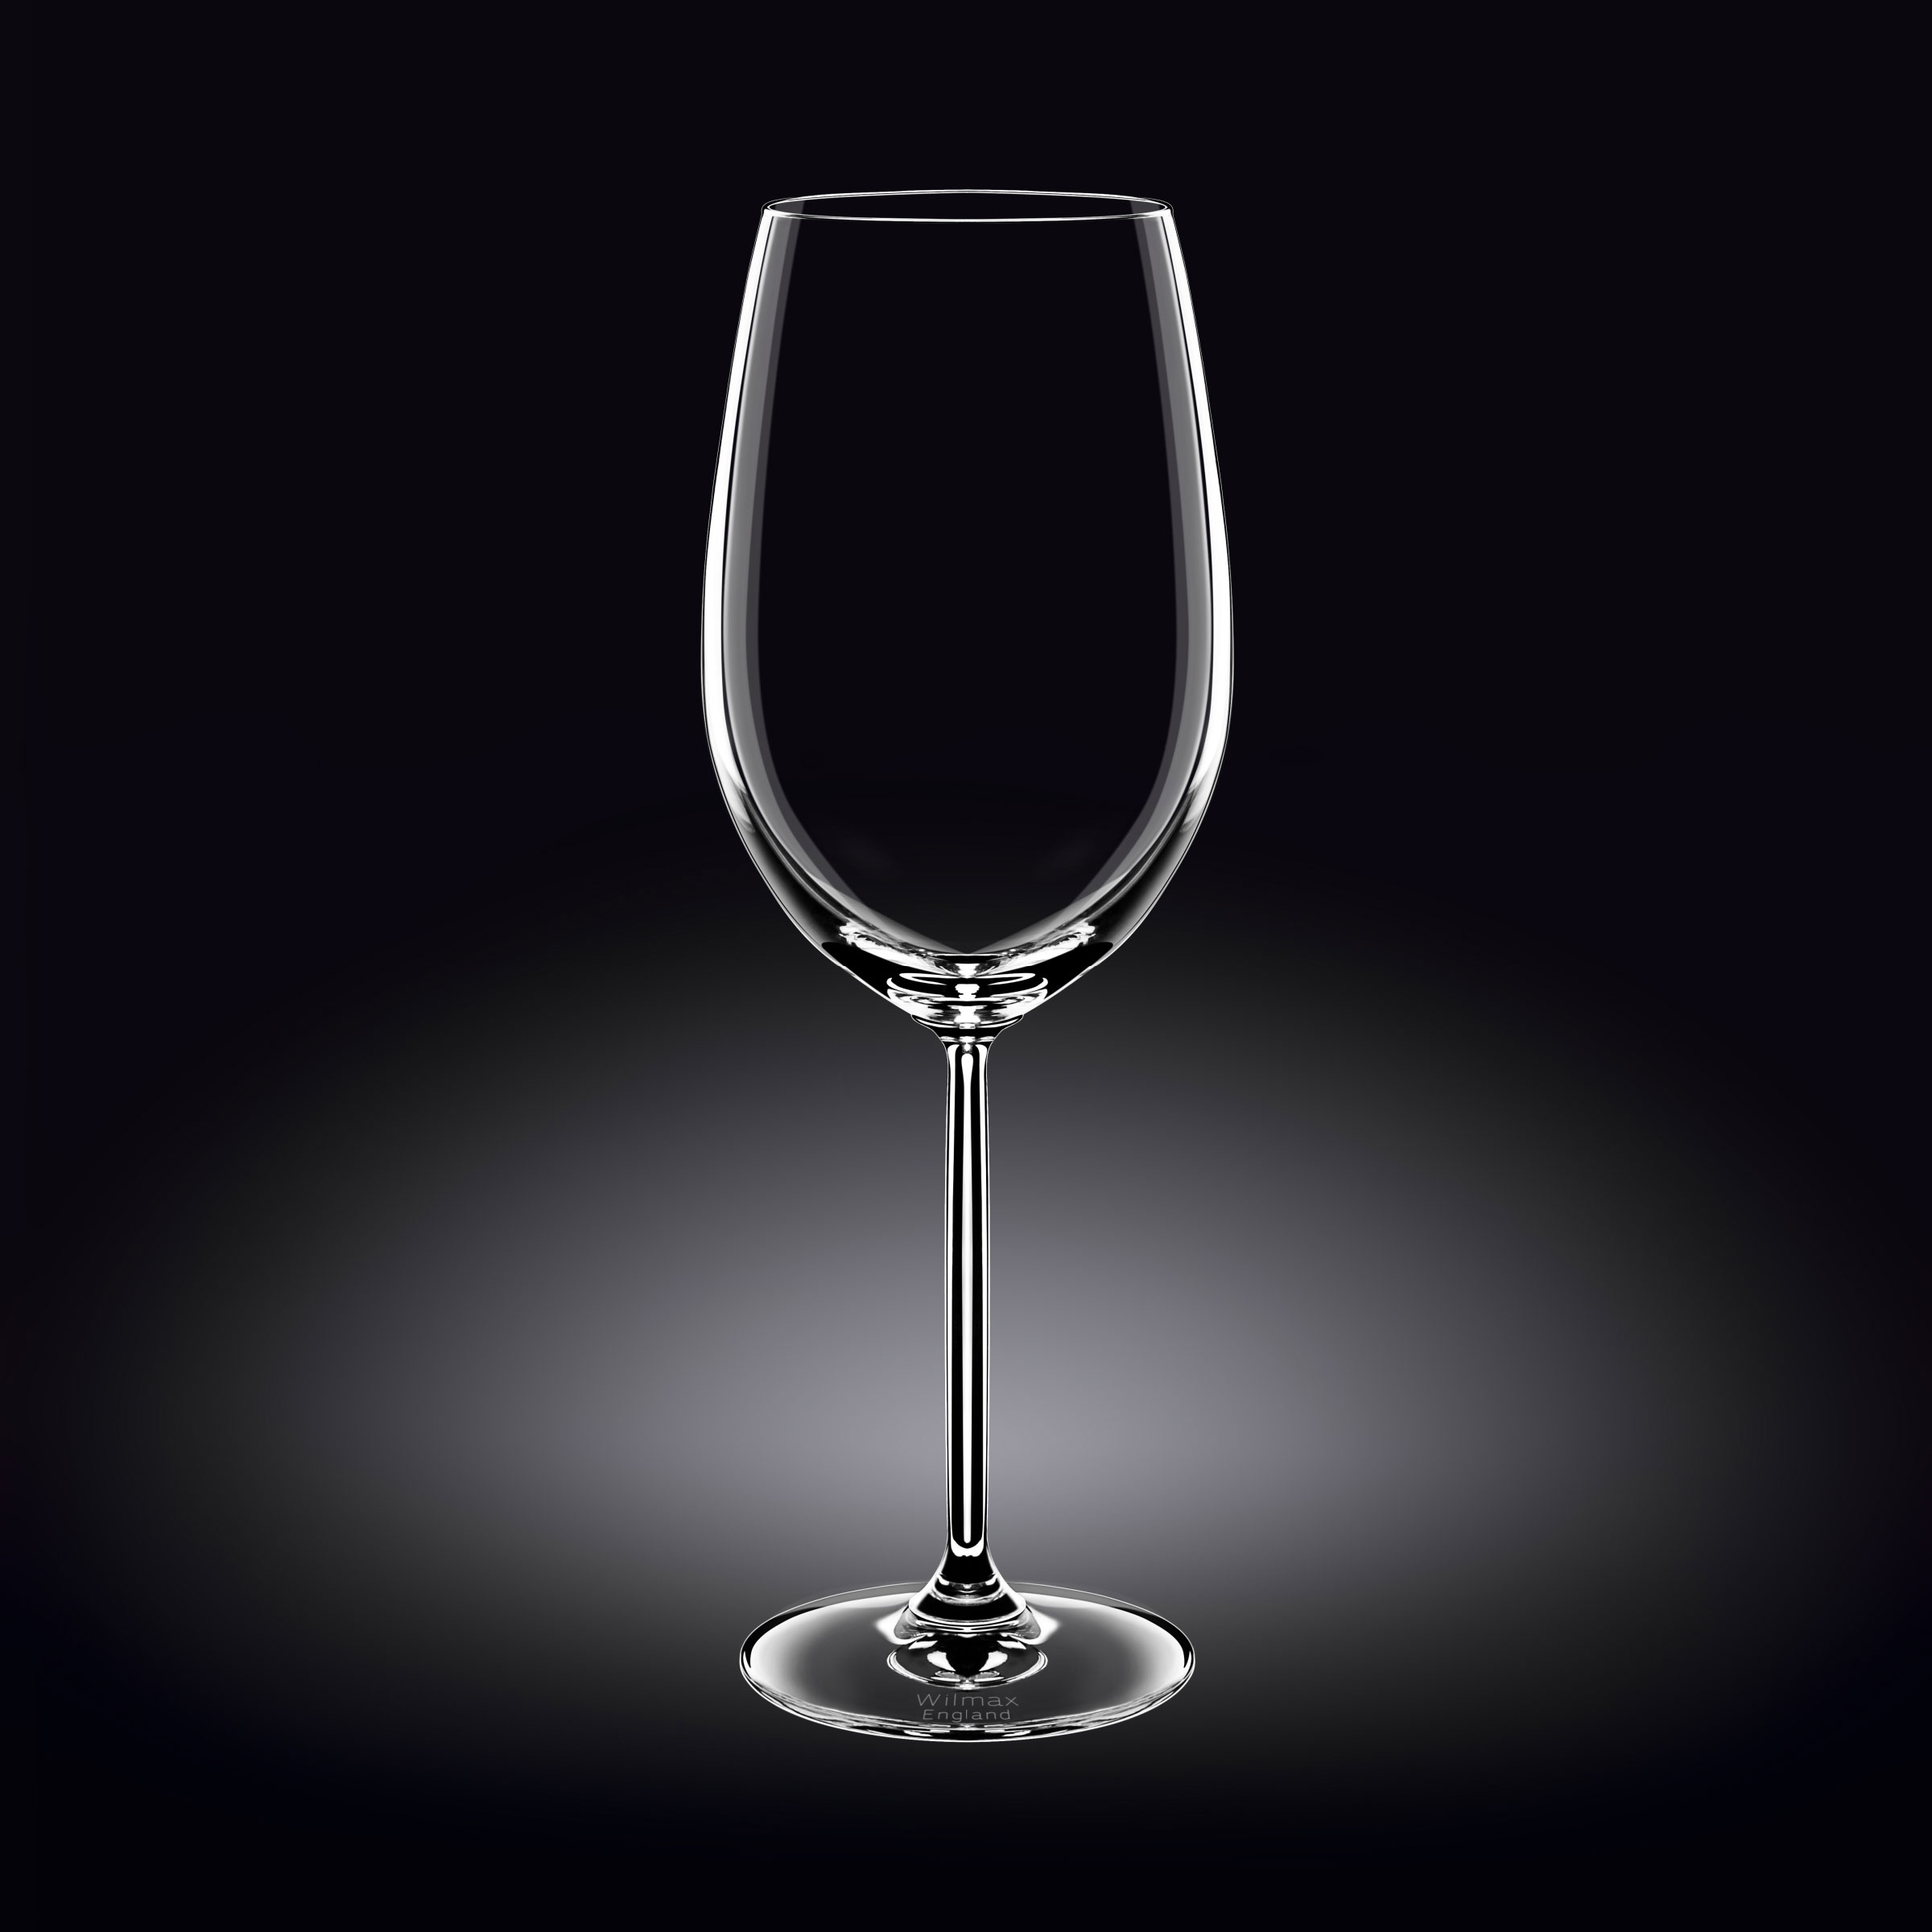 Brass Wine Glass - Set of 2 - WL2700 - WL2700 at Rs 1,240.15